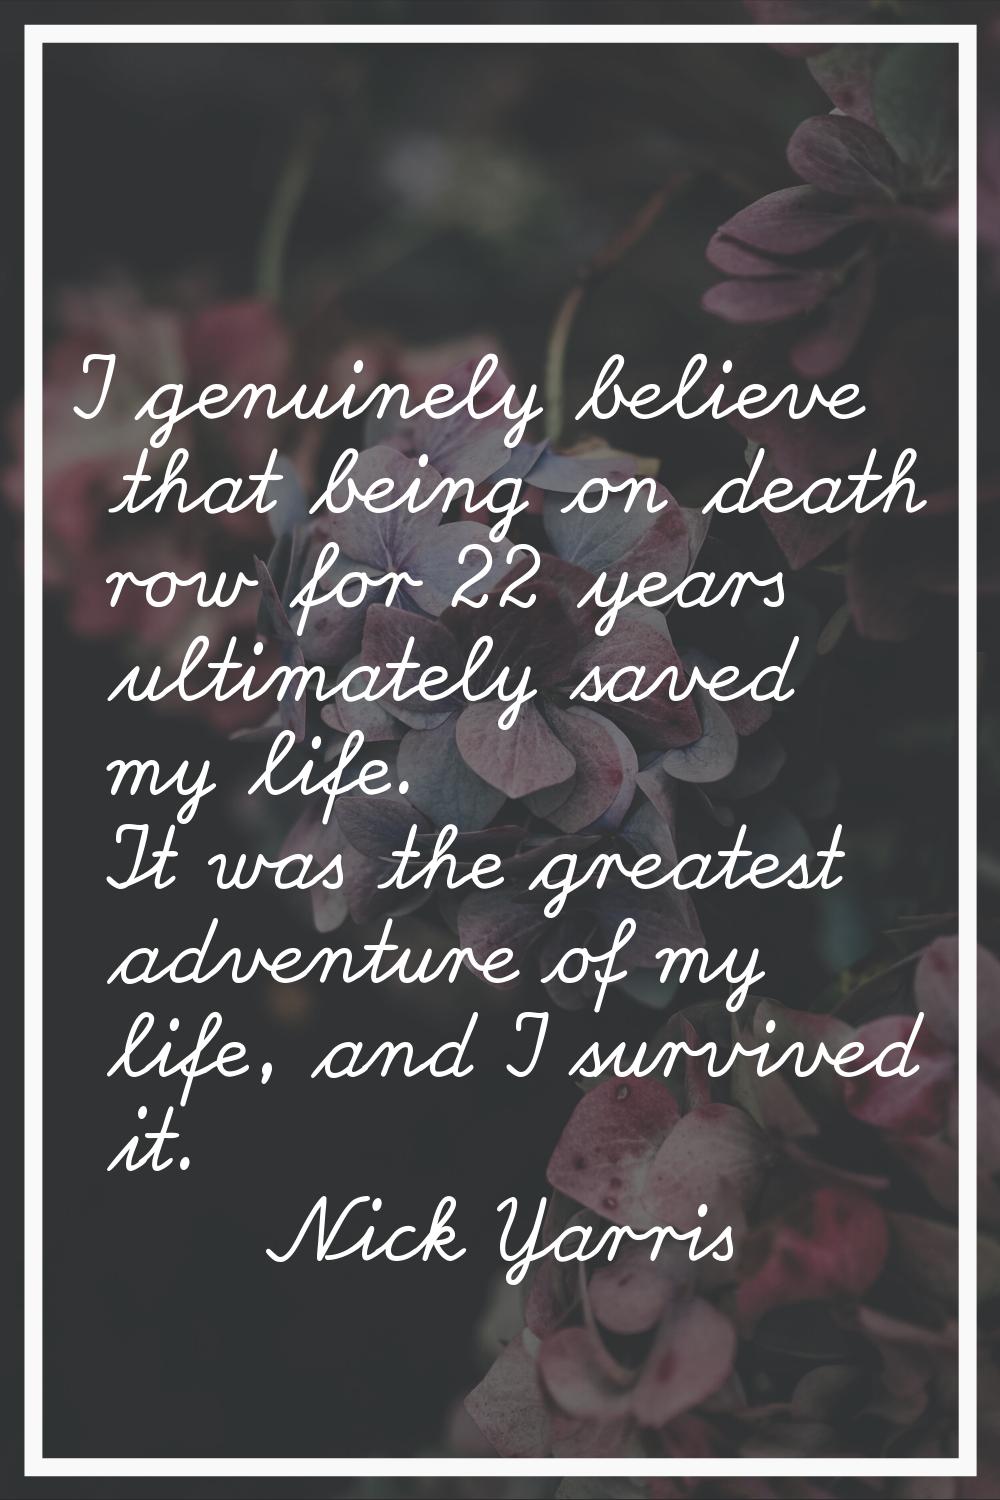 I genuinely believe that being on death row for 22 years ultimately saved my life. It was the great